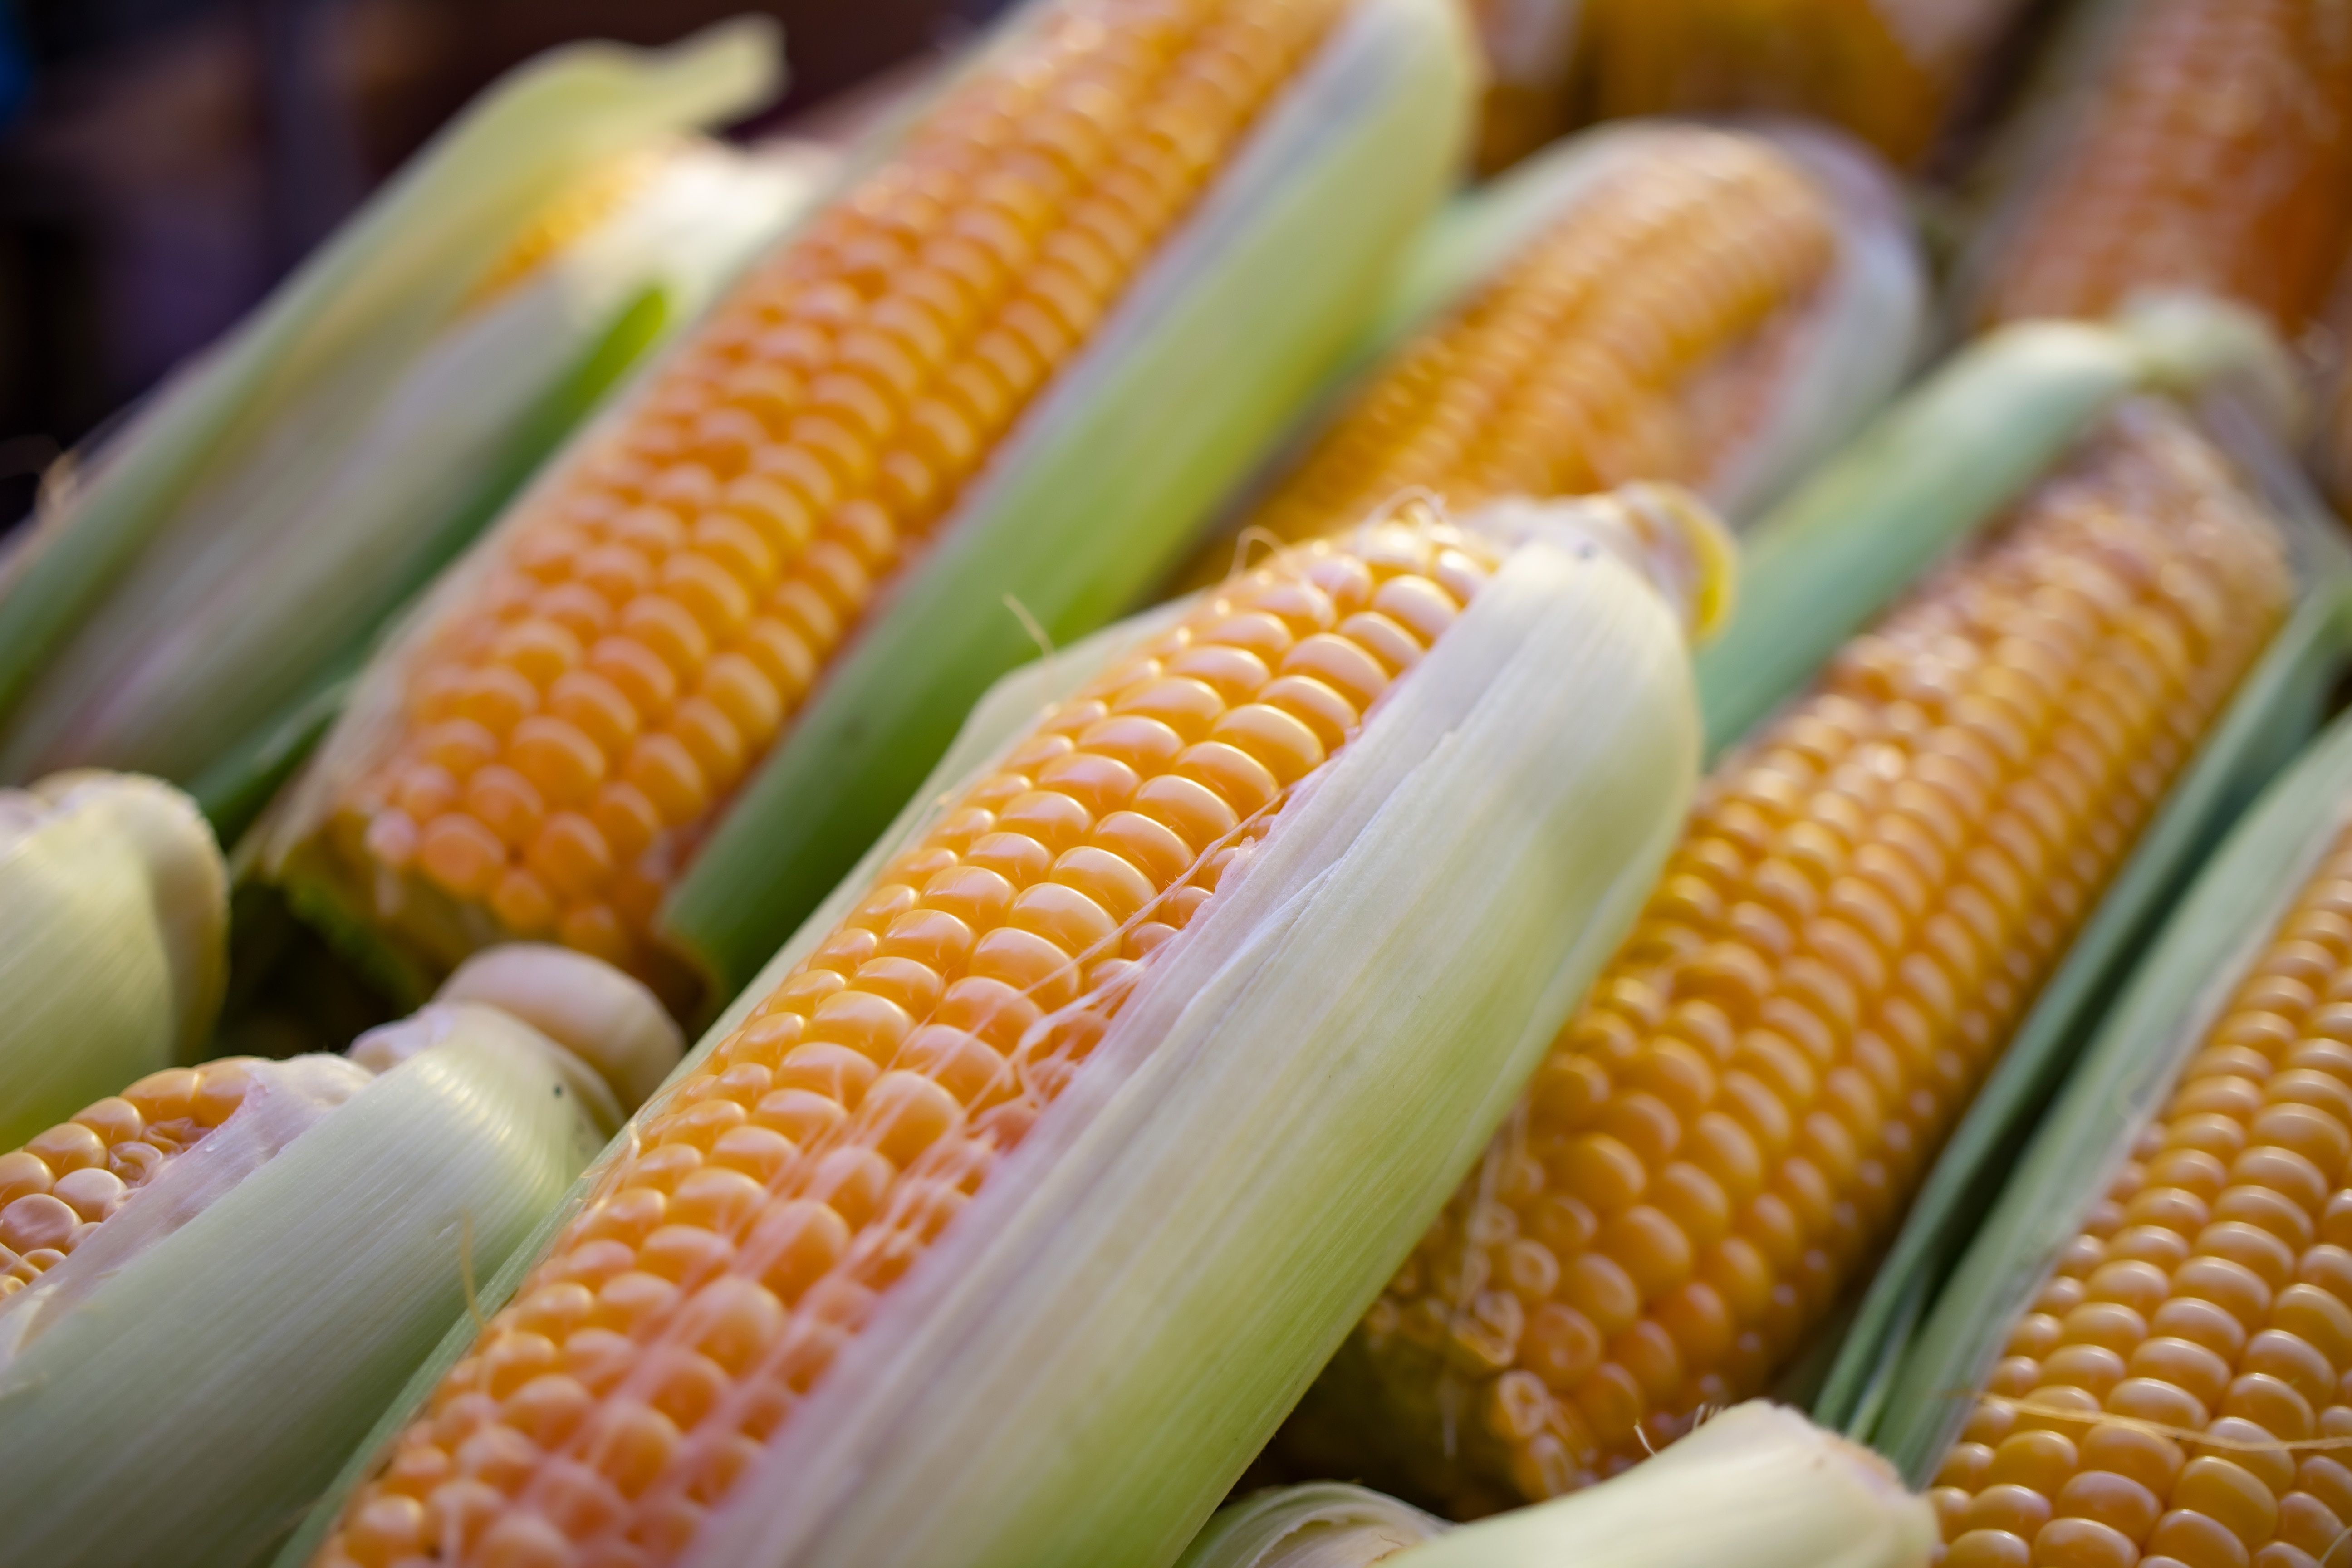 Ears of corn stacked on top of each other